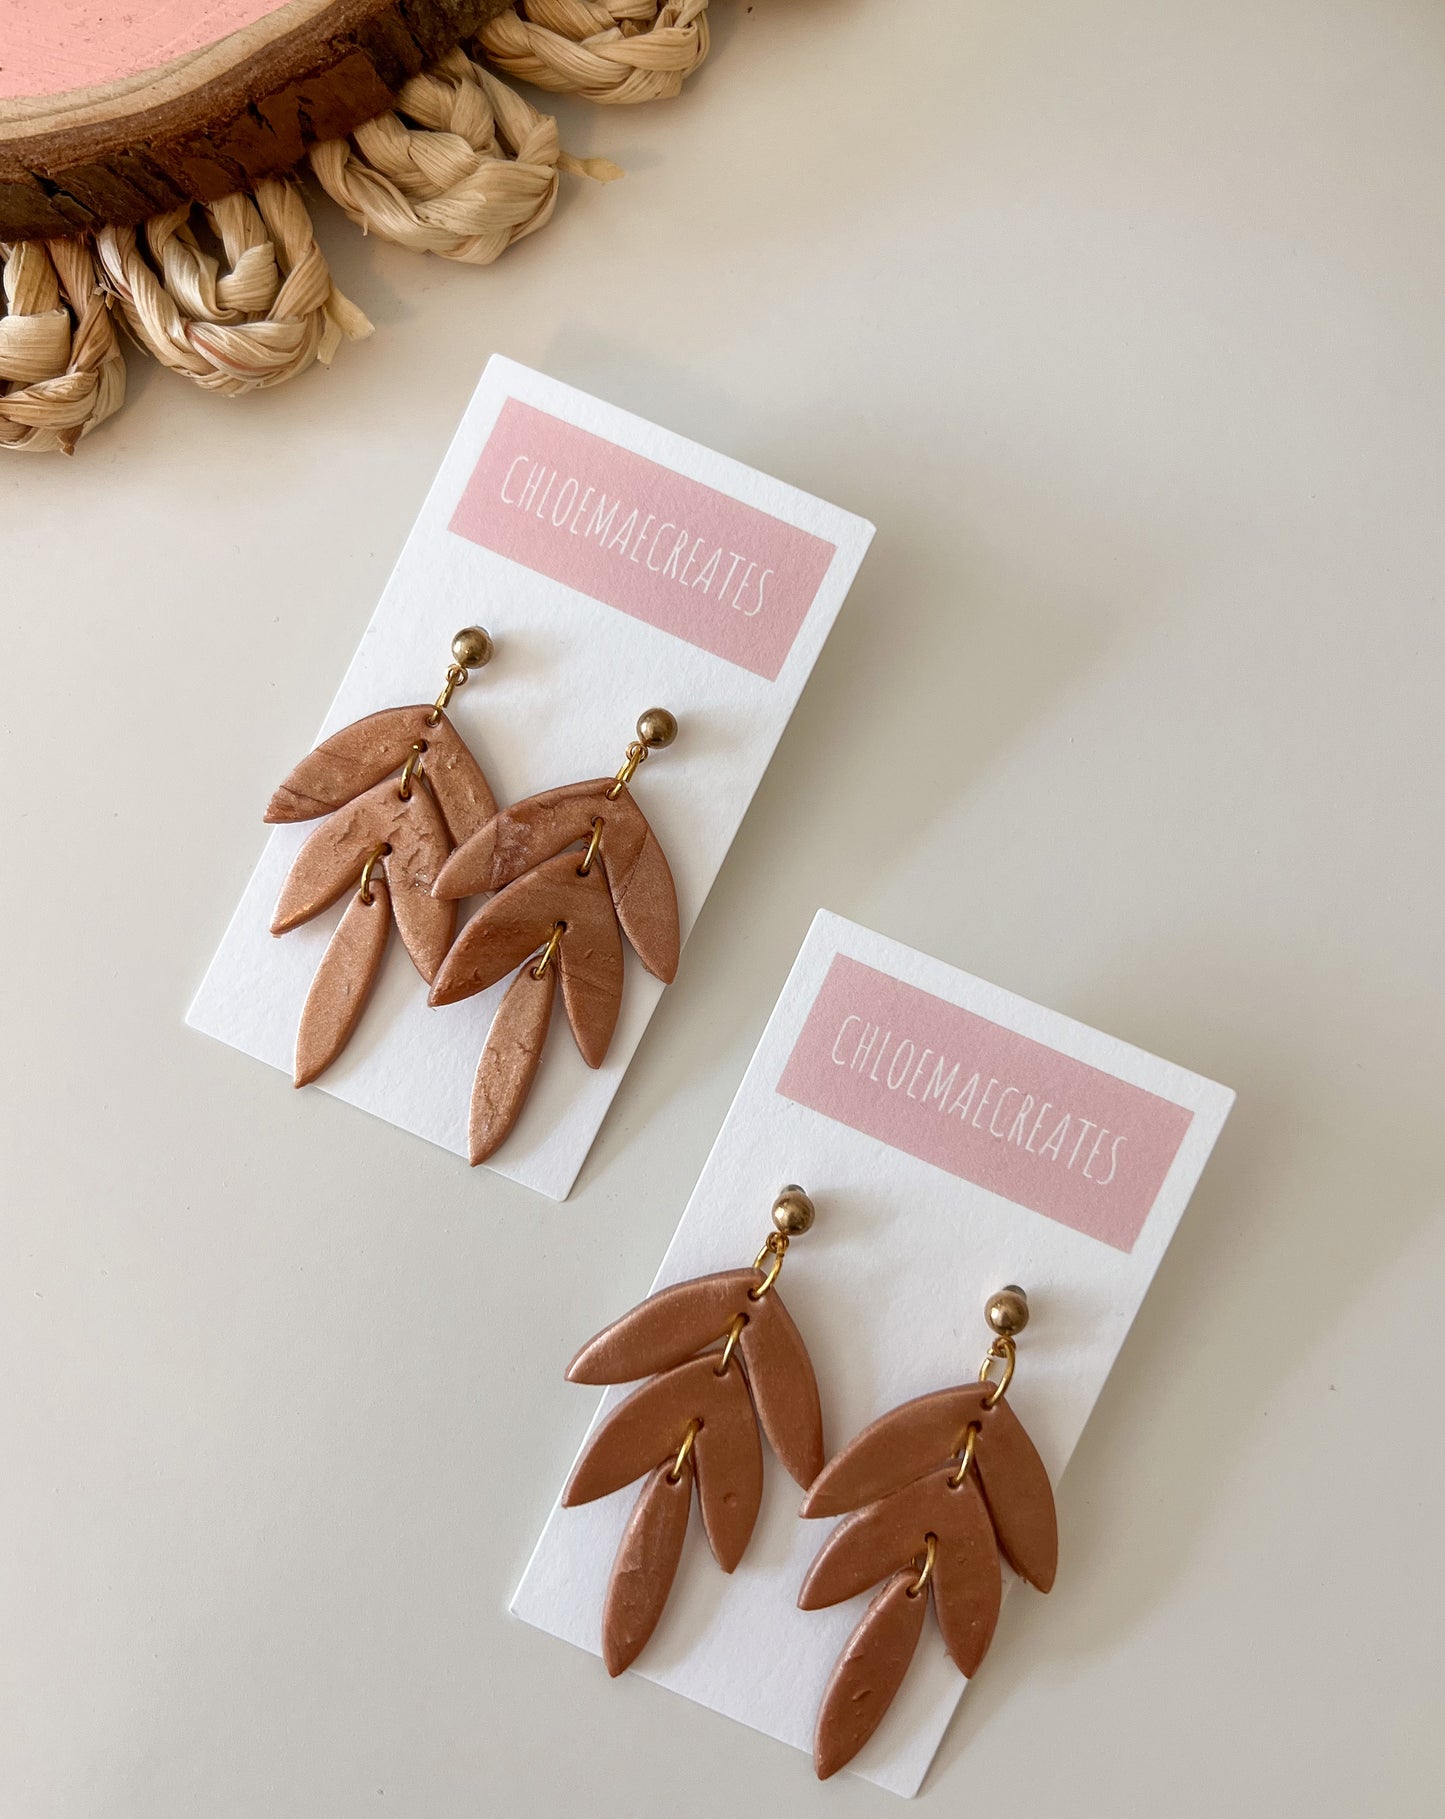 Tiered Clay Earrings - Copper